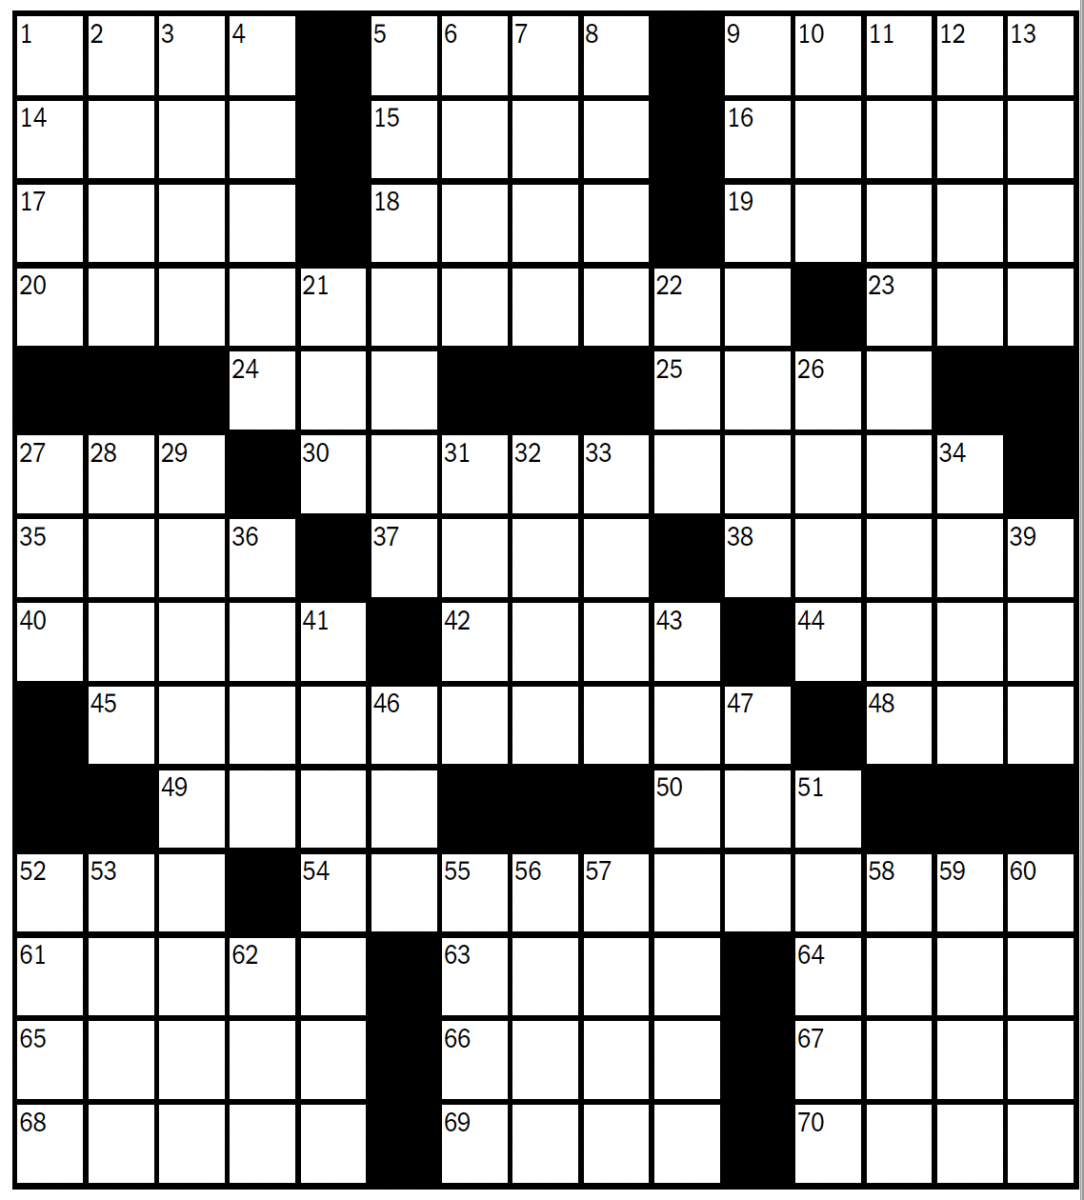 Science Teacher Nate Cardin published a crossword in the New York Times on Oct. 10.